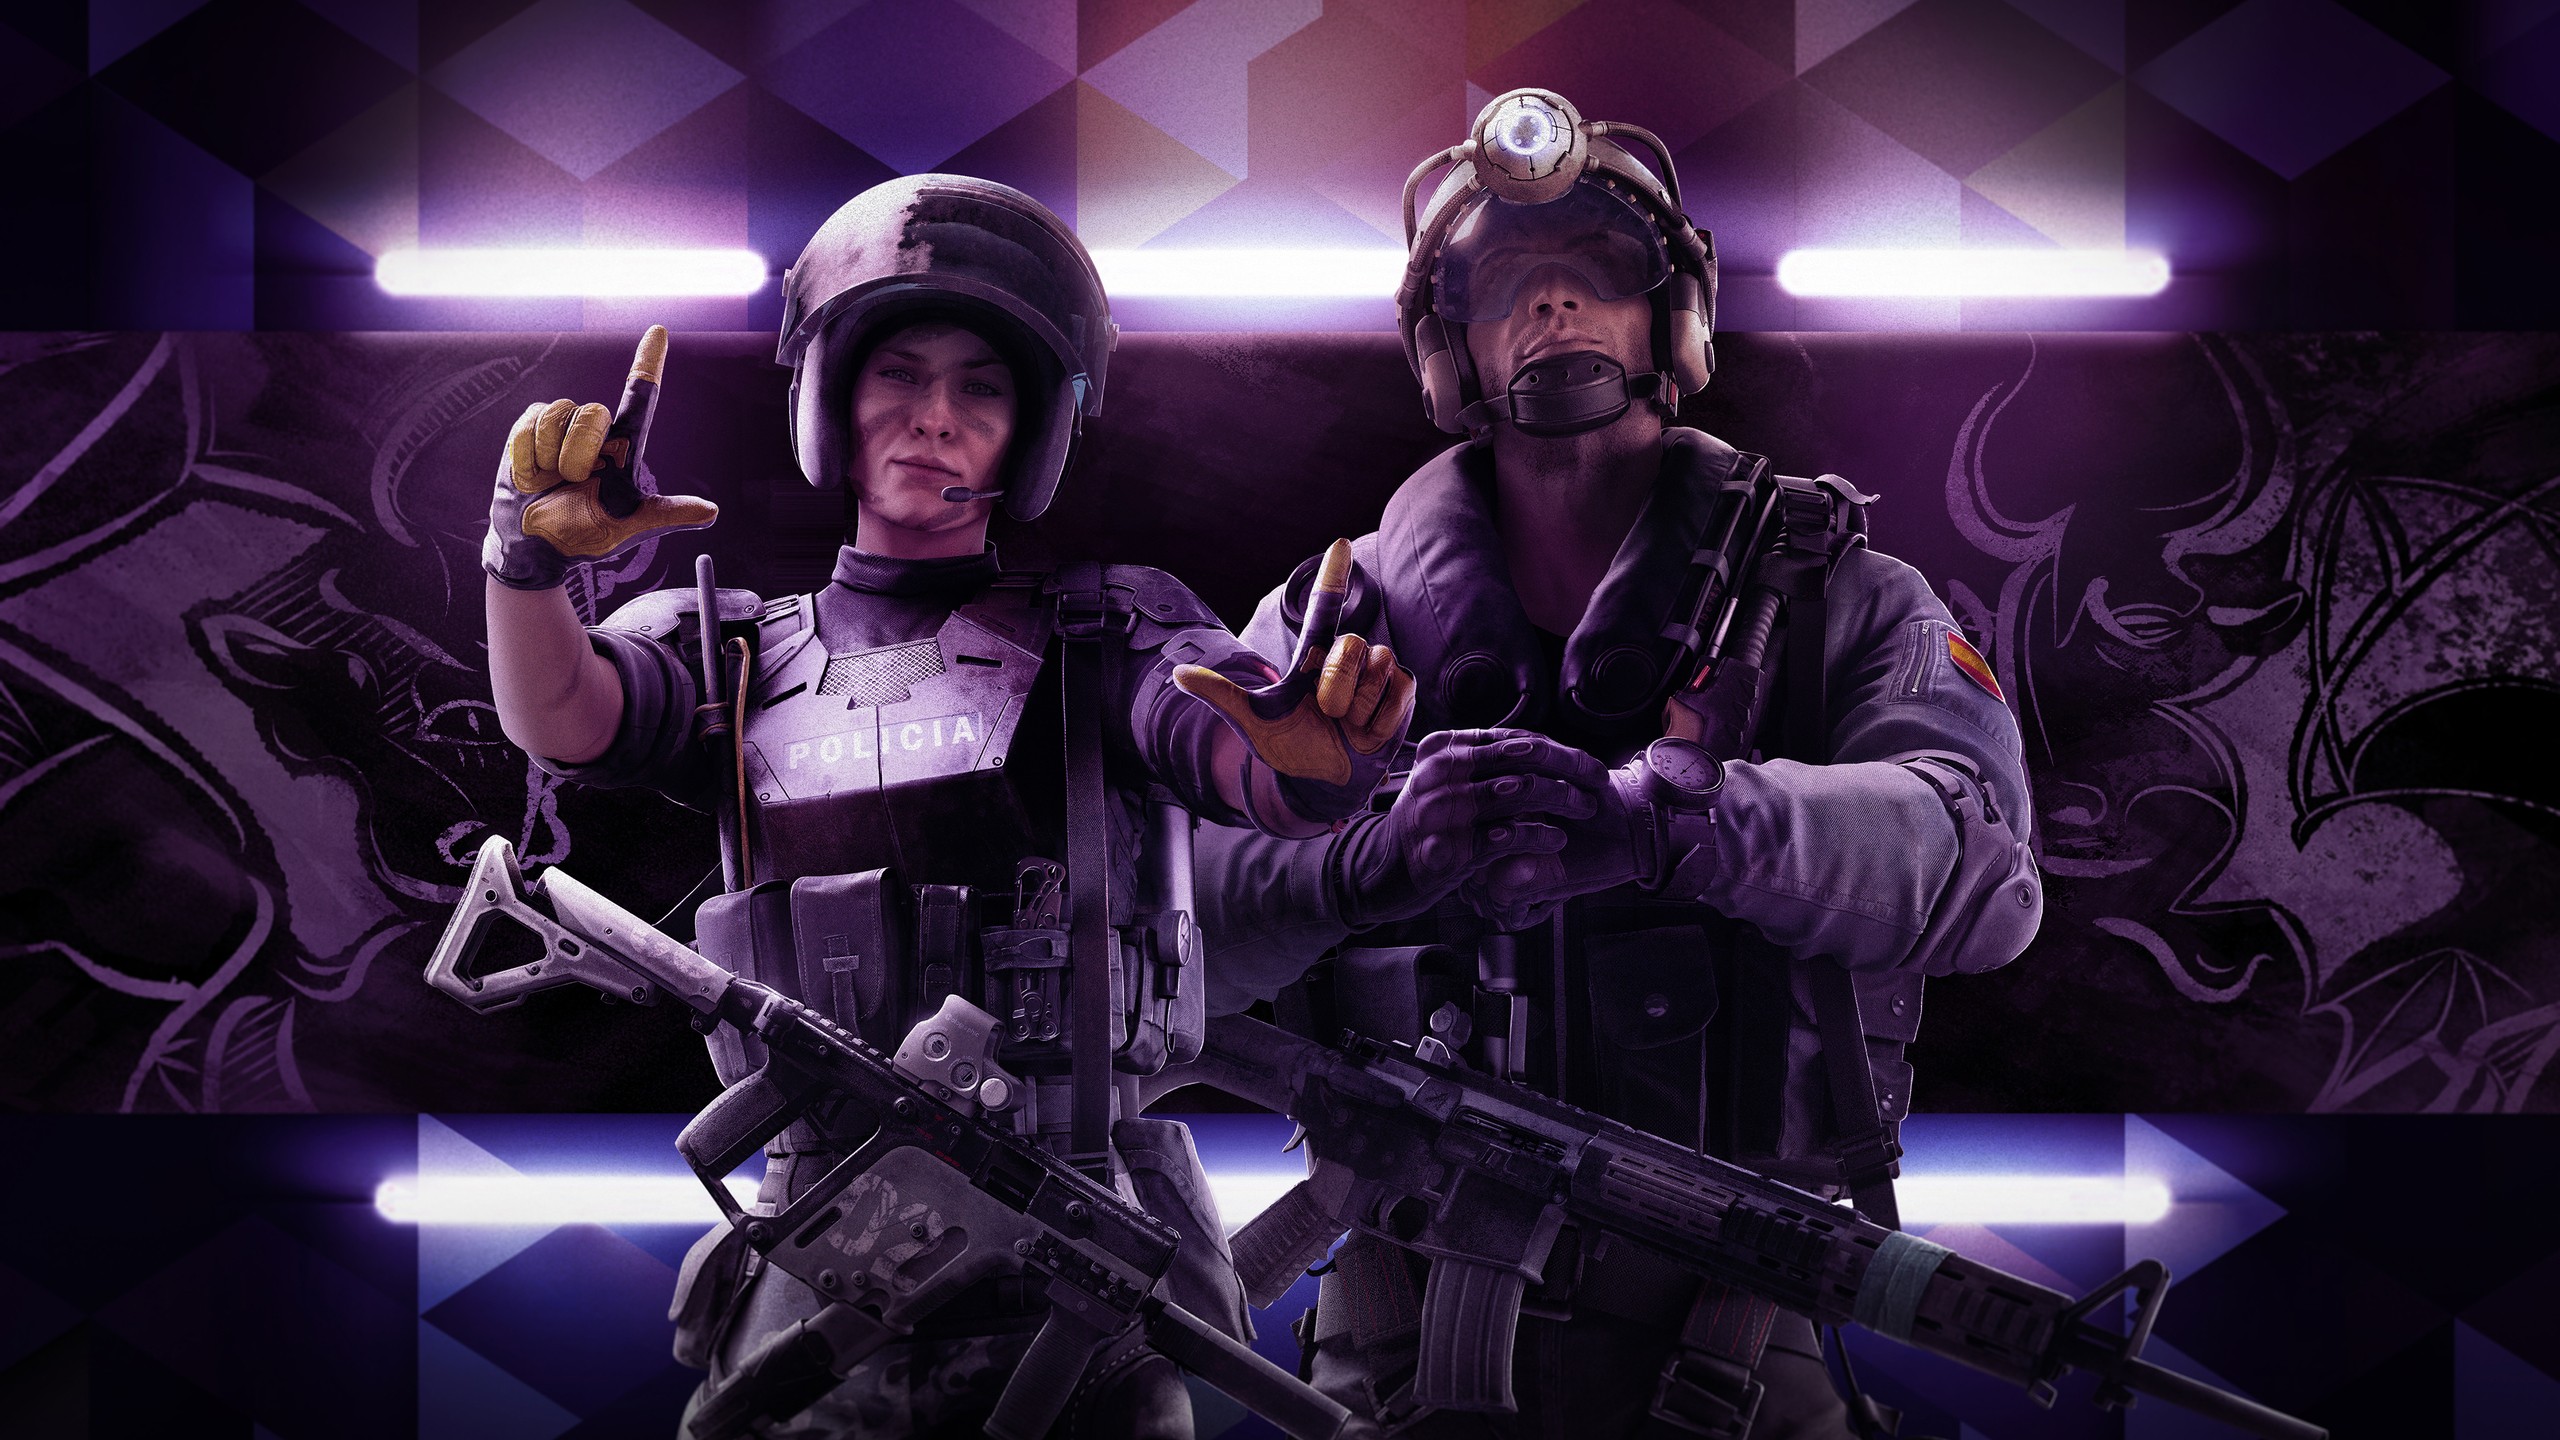 Spanish, PC gaming, Rainbow Six: Siege, Ubisoft, Military, Special forces, DLC Wallpaper